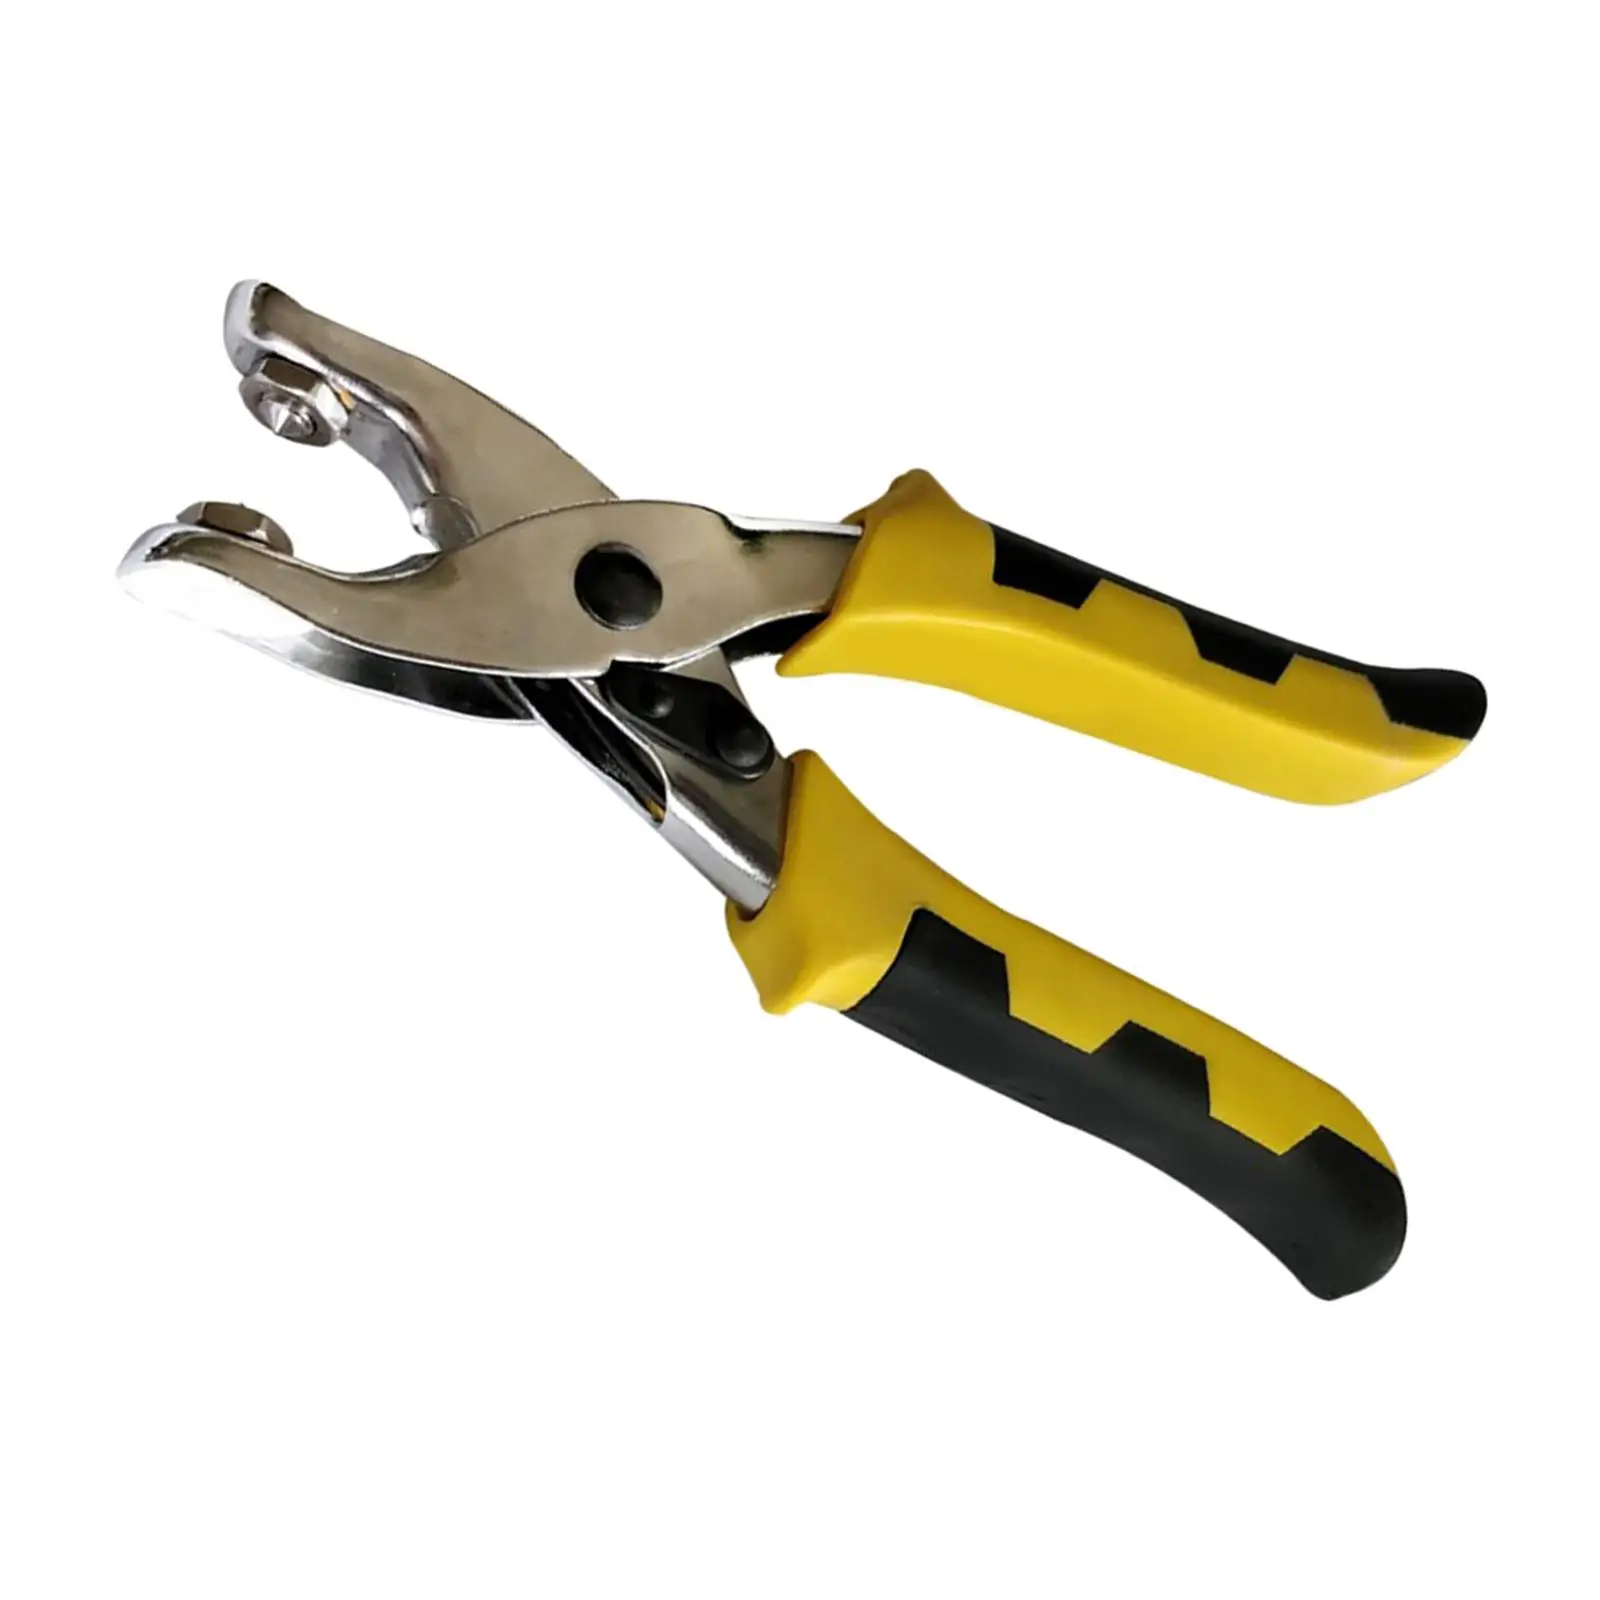 Durable Pliers for Badminton Racket, String Clamp Grommet Tool, Racquet Racket Threading Pincer Forceps Equipment